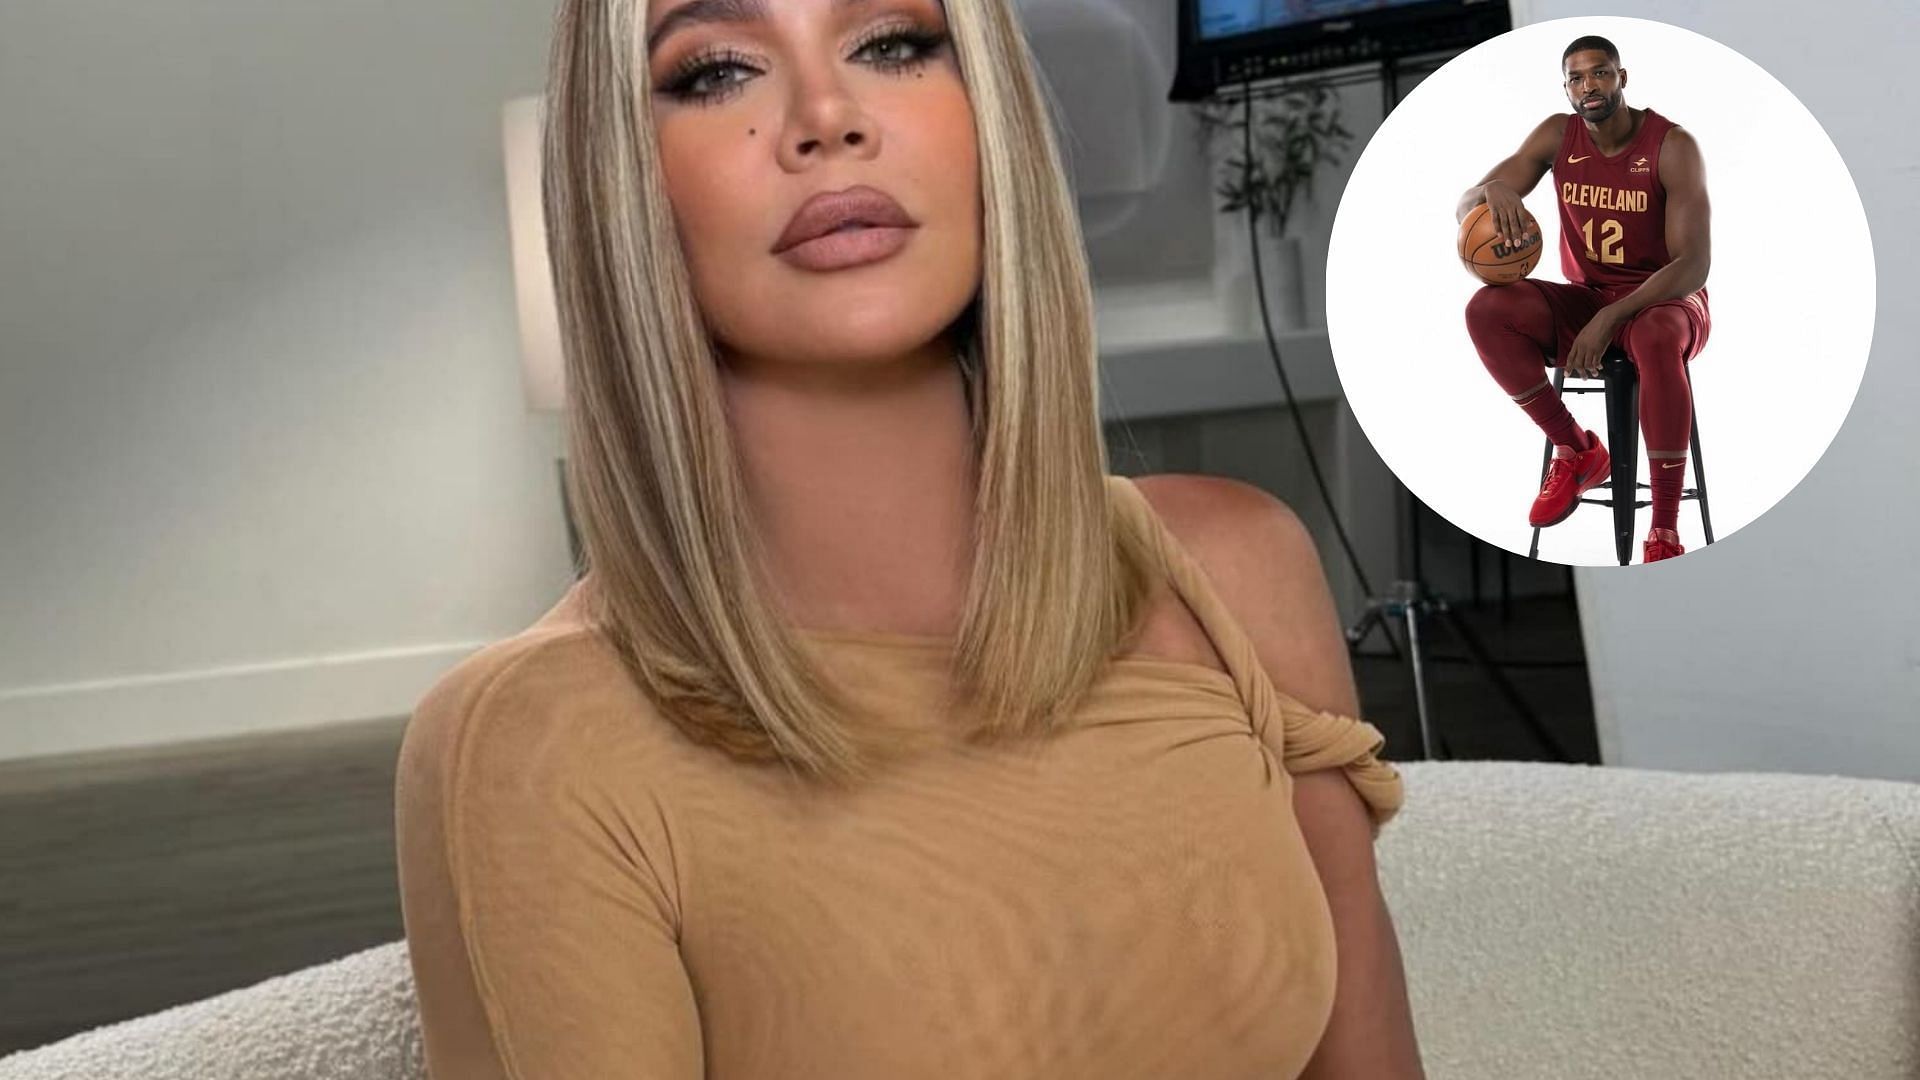 Khloe Kardashian spotted in attendance at Cavs-Celtics game to support ex Tristan Thompson